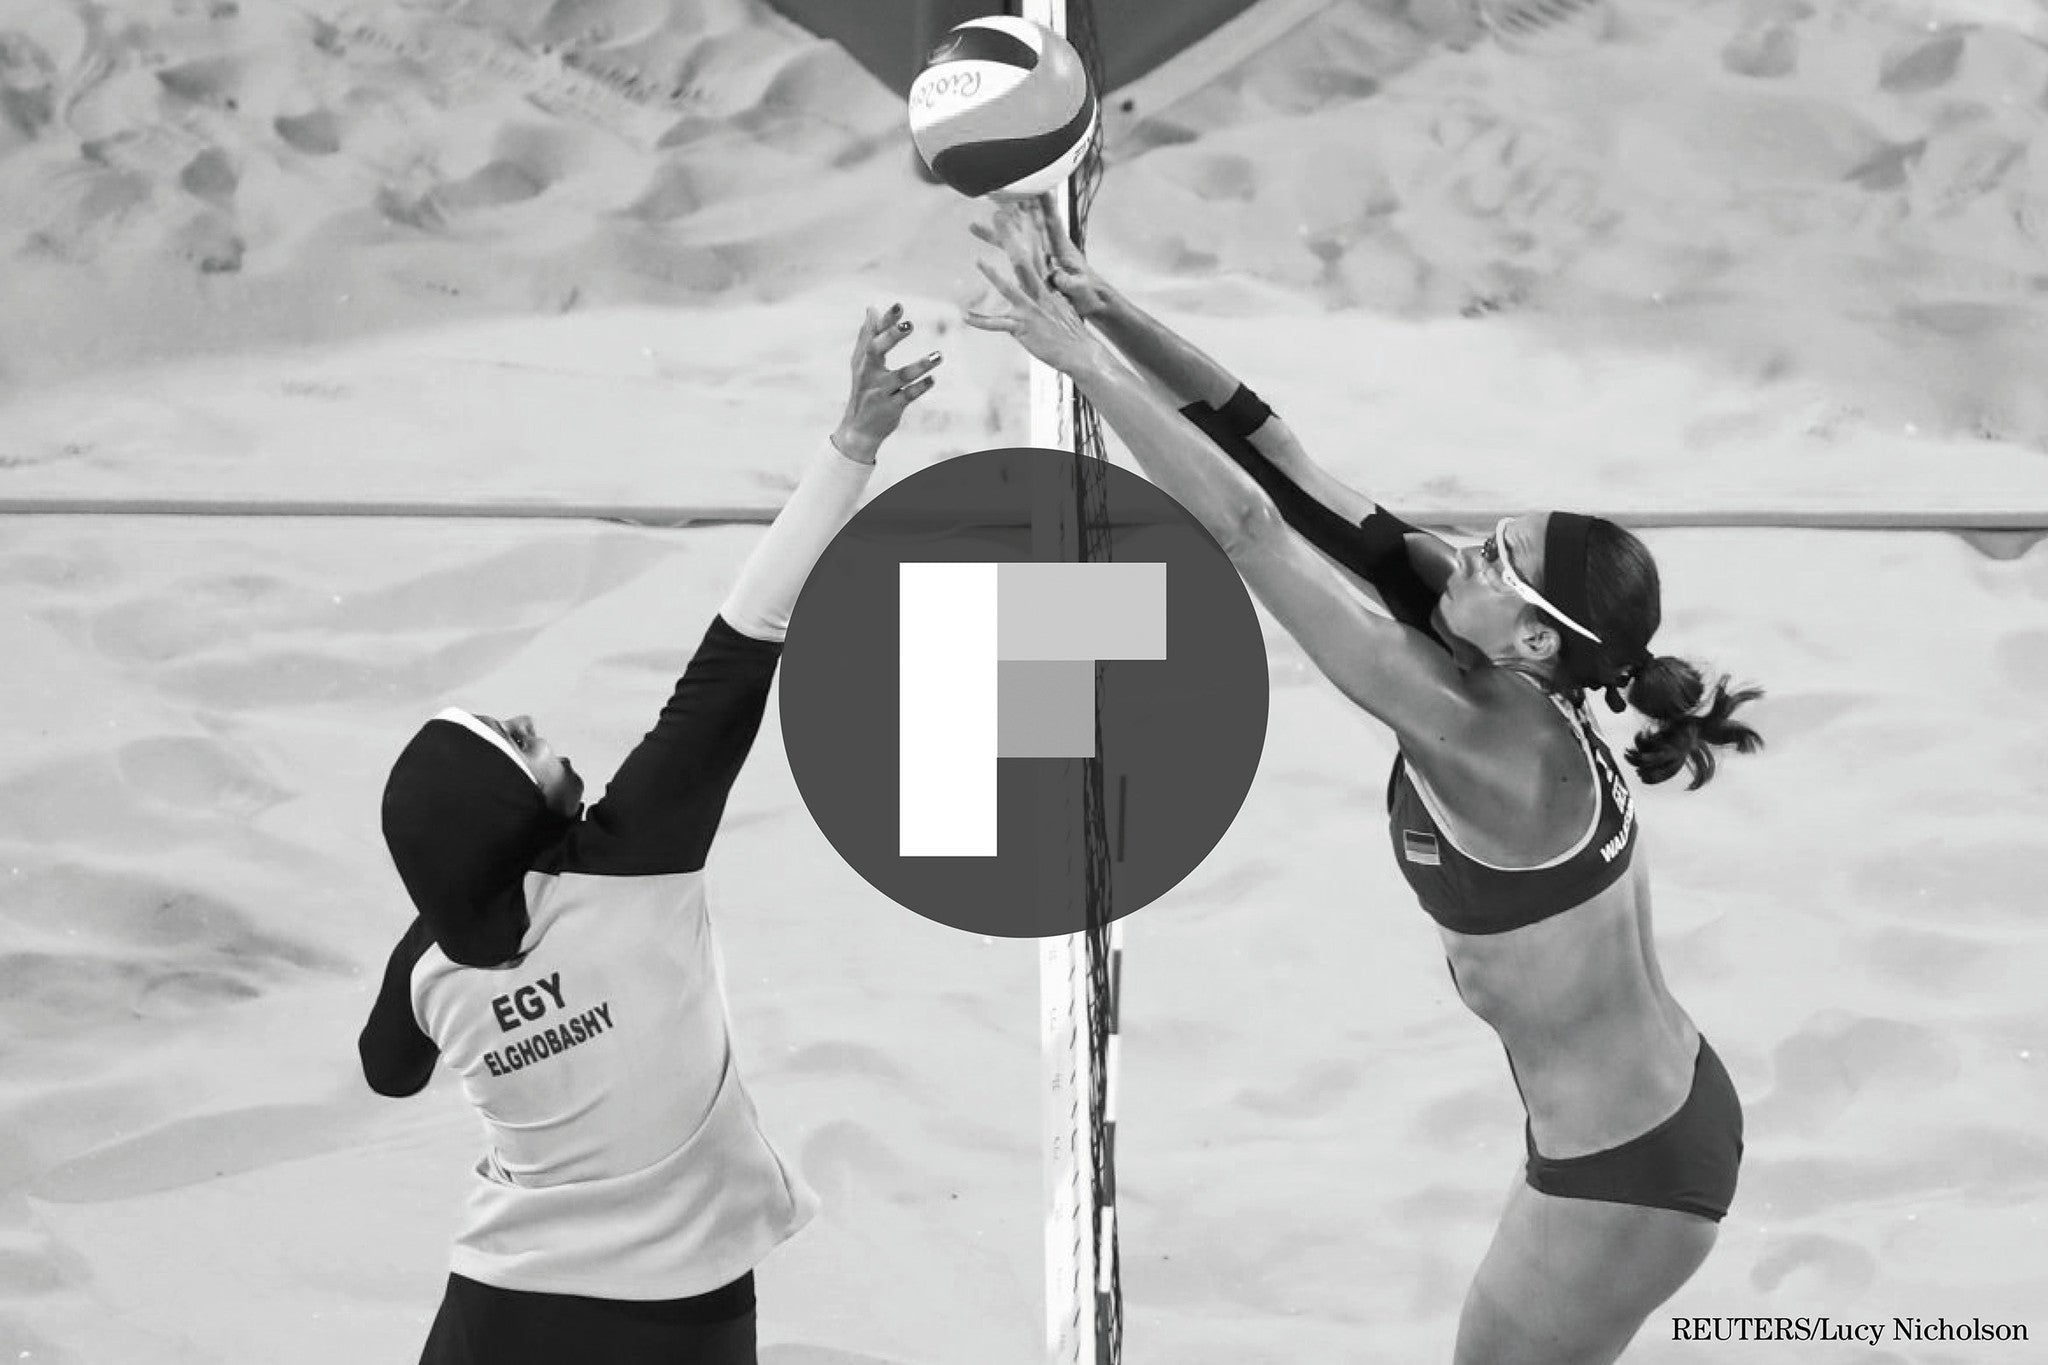 Flipboard: How Tomboys Owned The Olympics